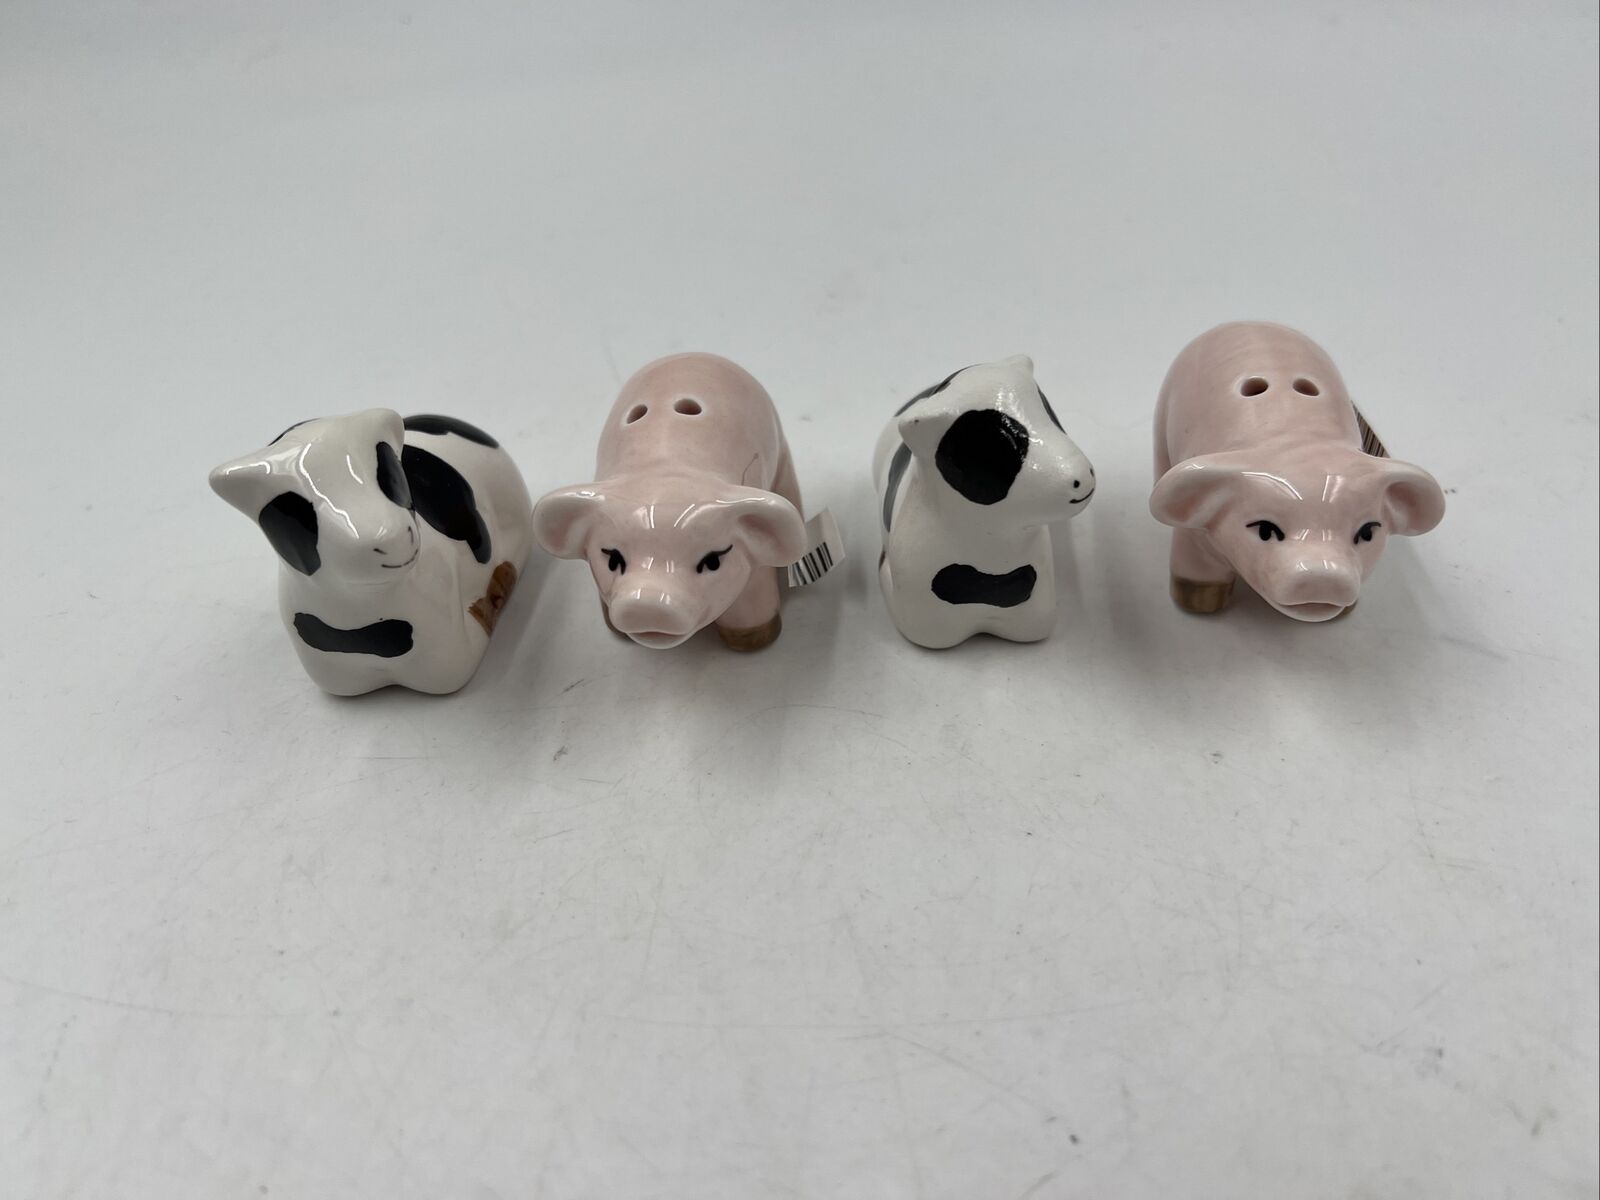 Ceramic 2x2in Cow and Pig Salt & Pepper Shaker Sets AA01B25003